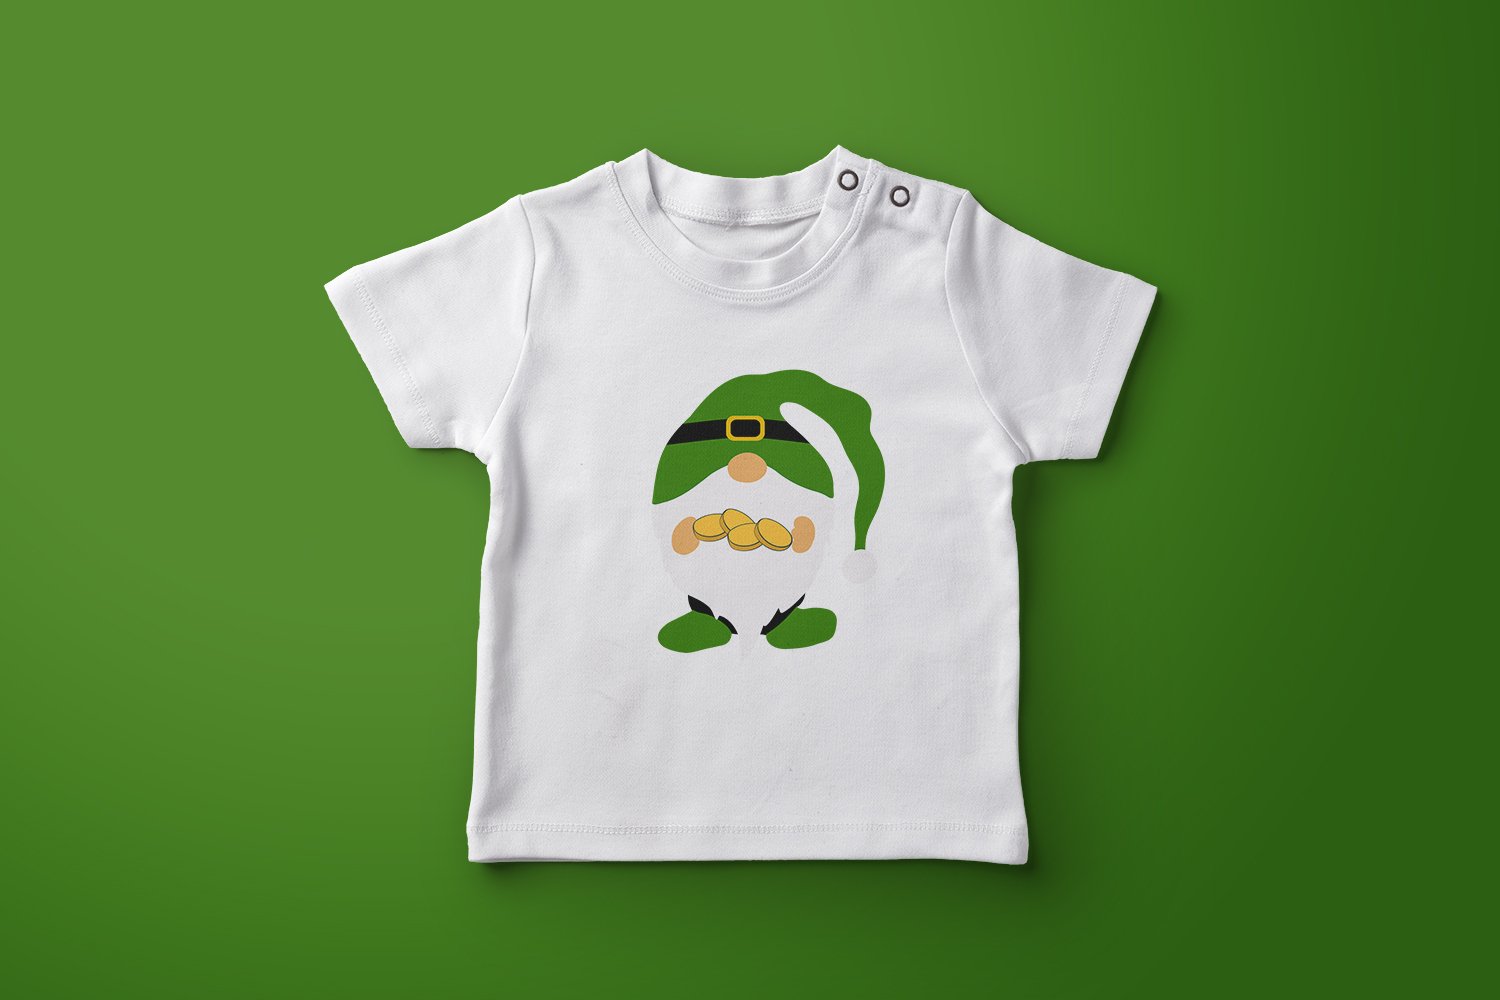 High quality t-shirt with green gnome.